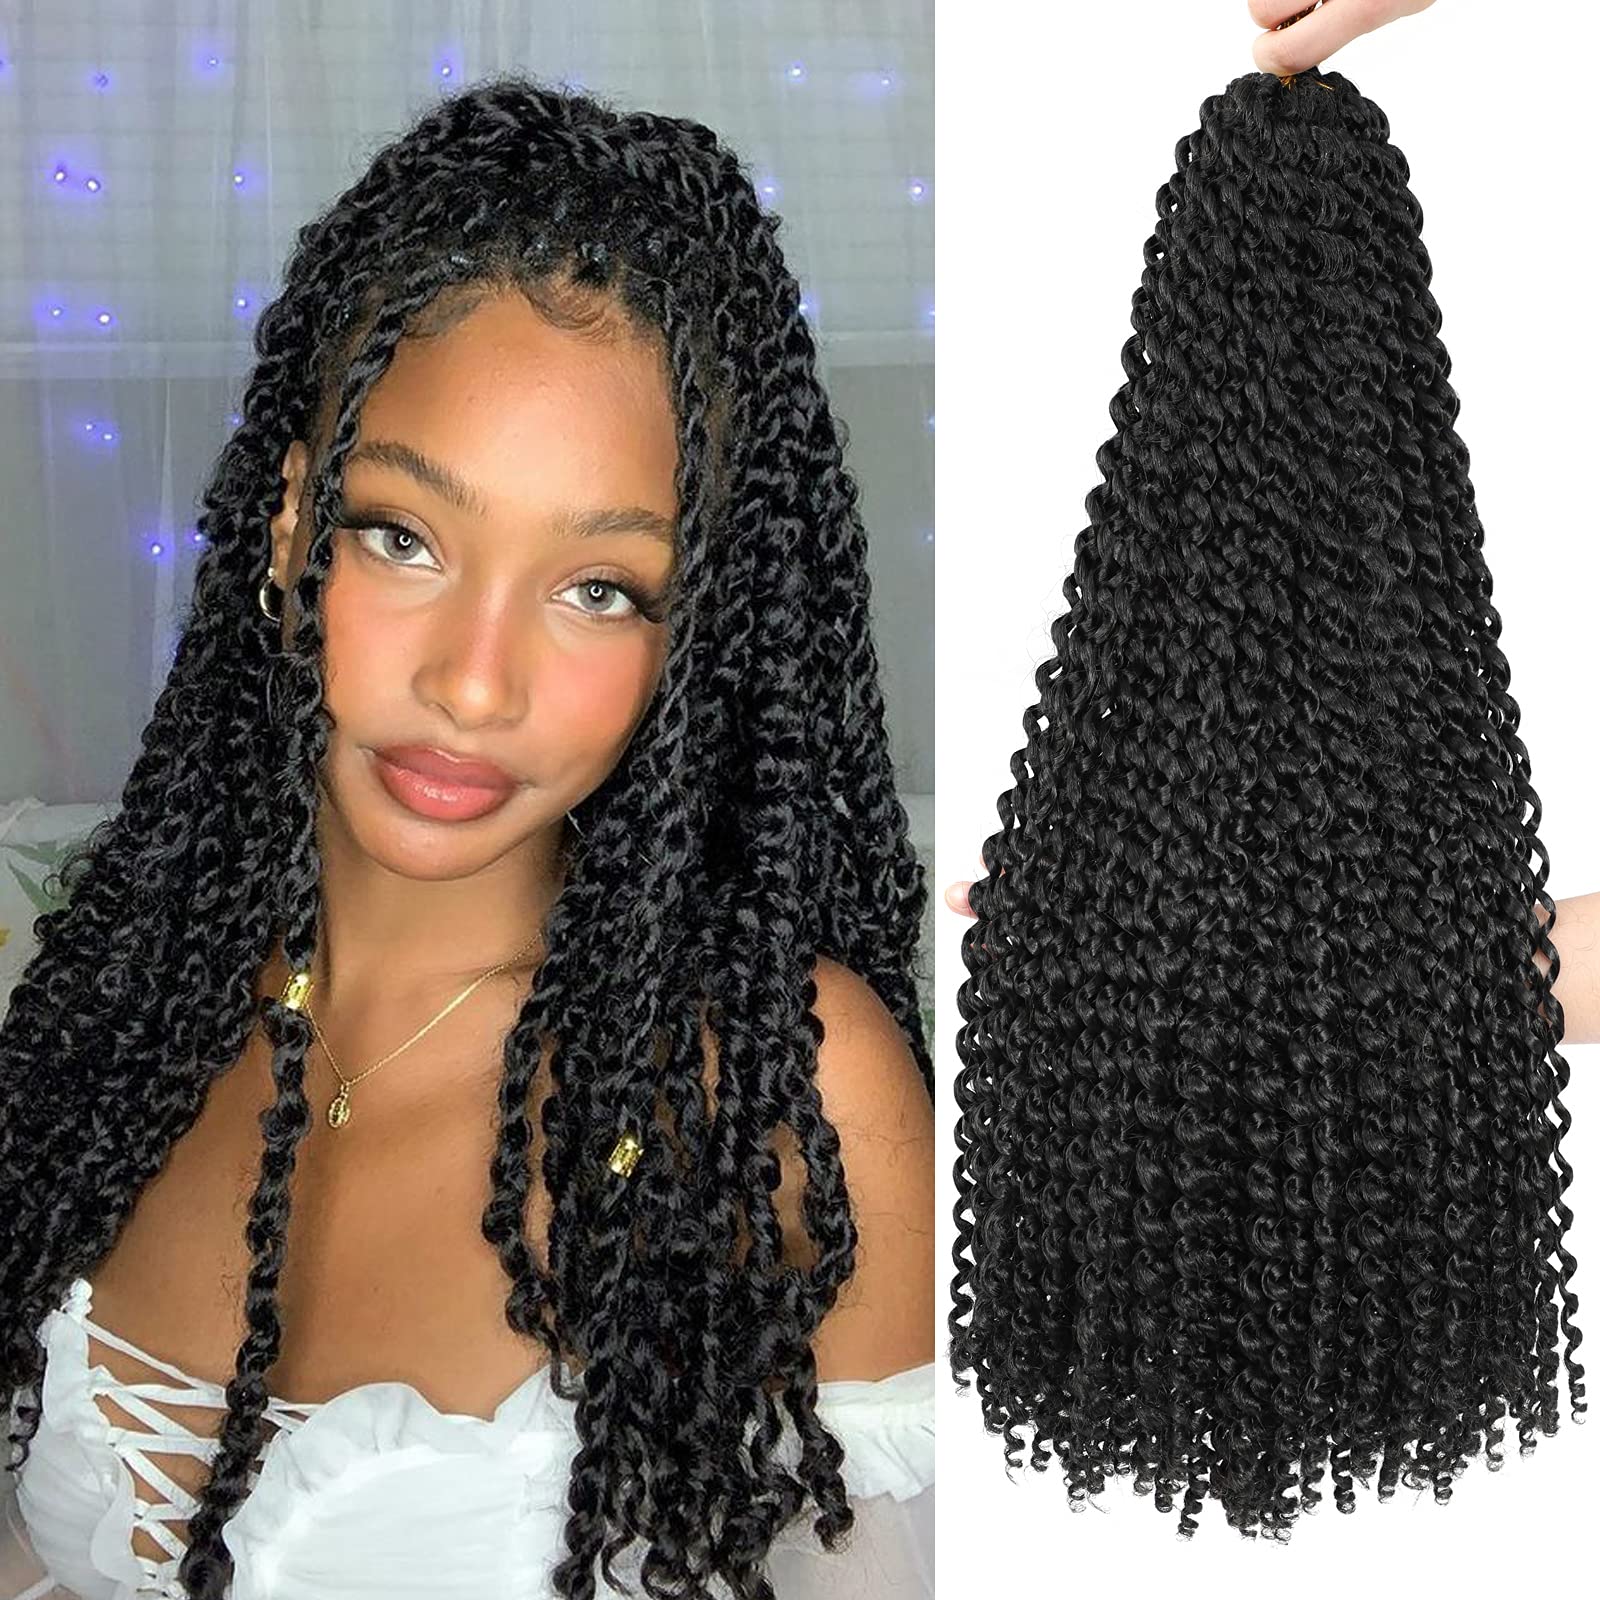 Passion Twist Hair 8 Packs Water Wave Crochet Hair 20 Inch Passion ...